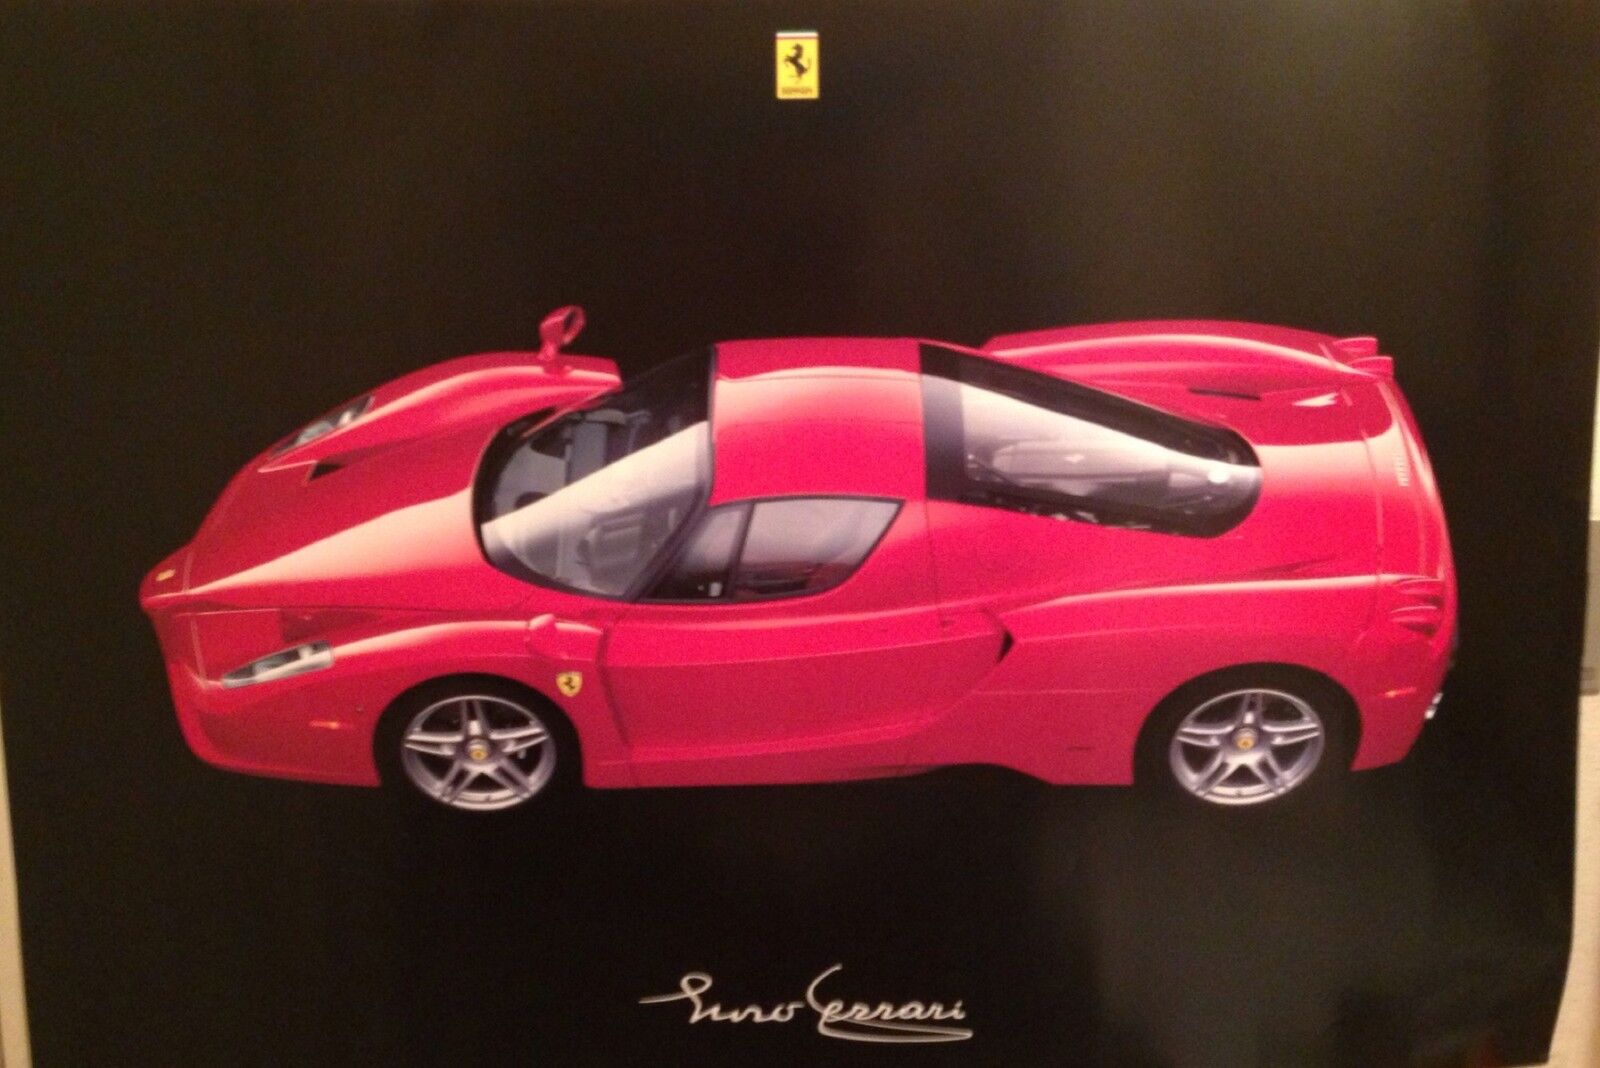 Ferrari (Enzo) Factory Car Poster Extremley Rare Out Of Print